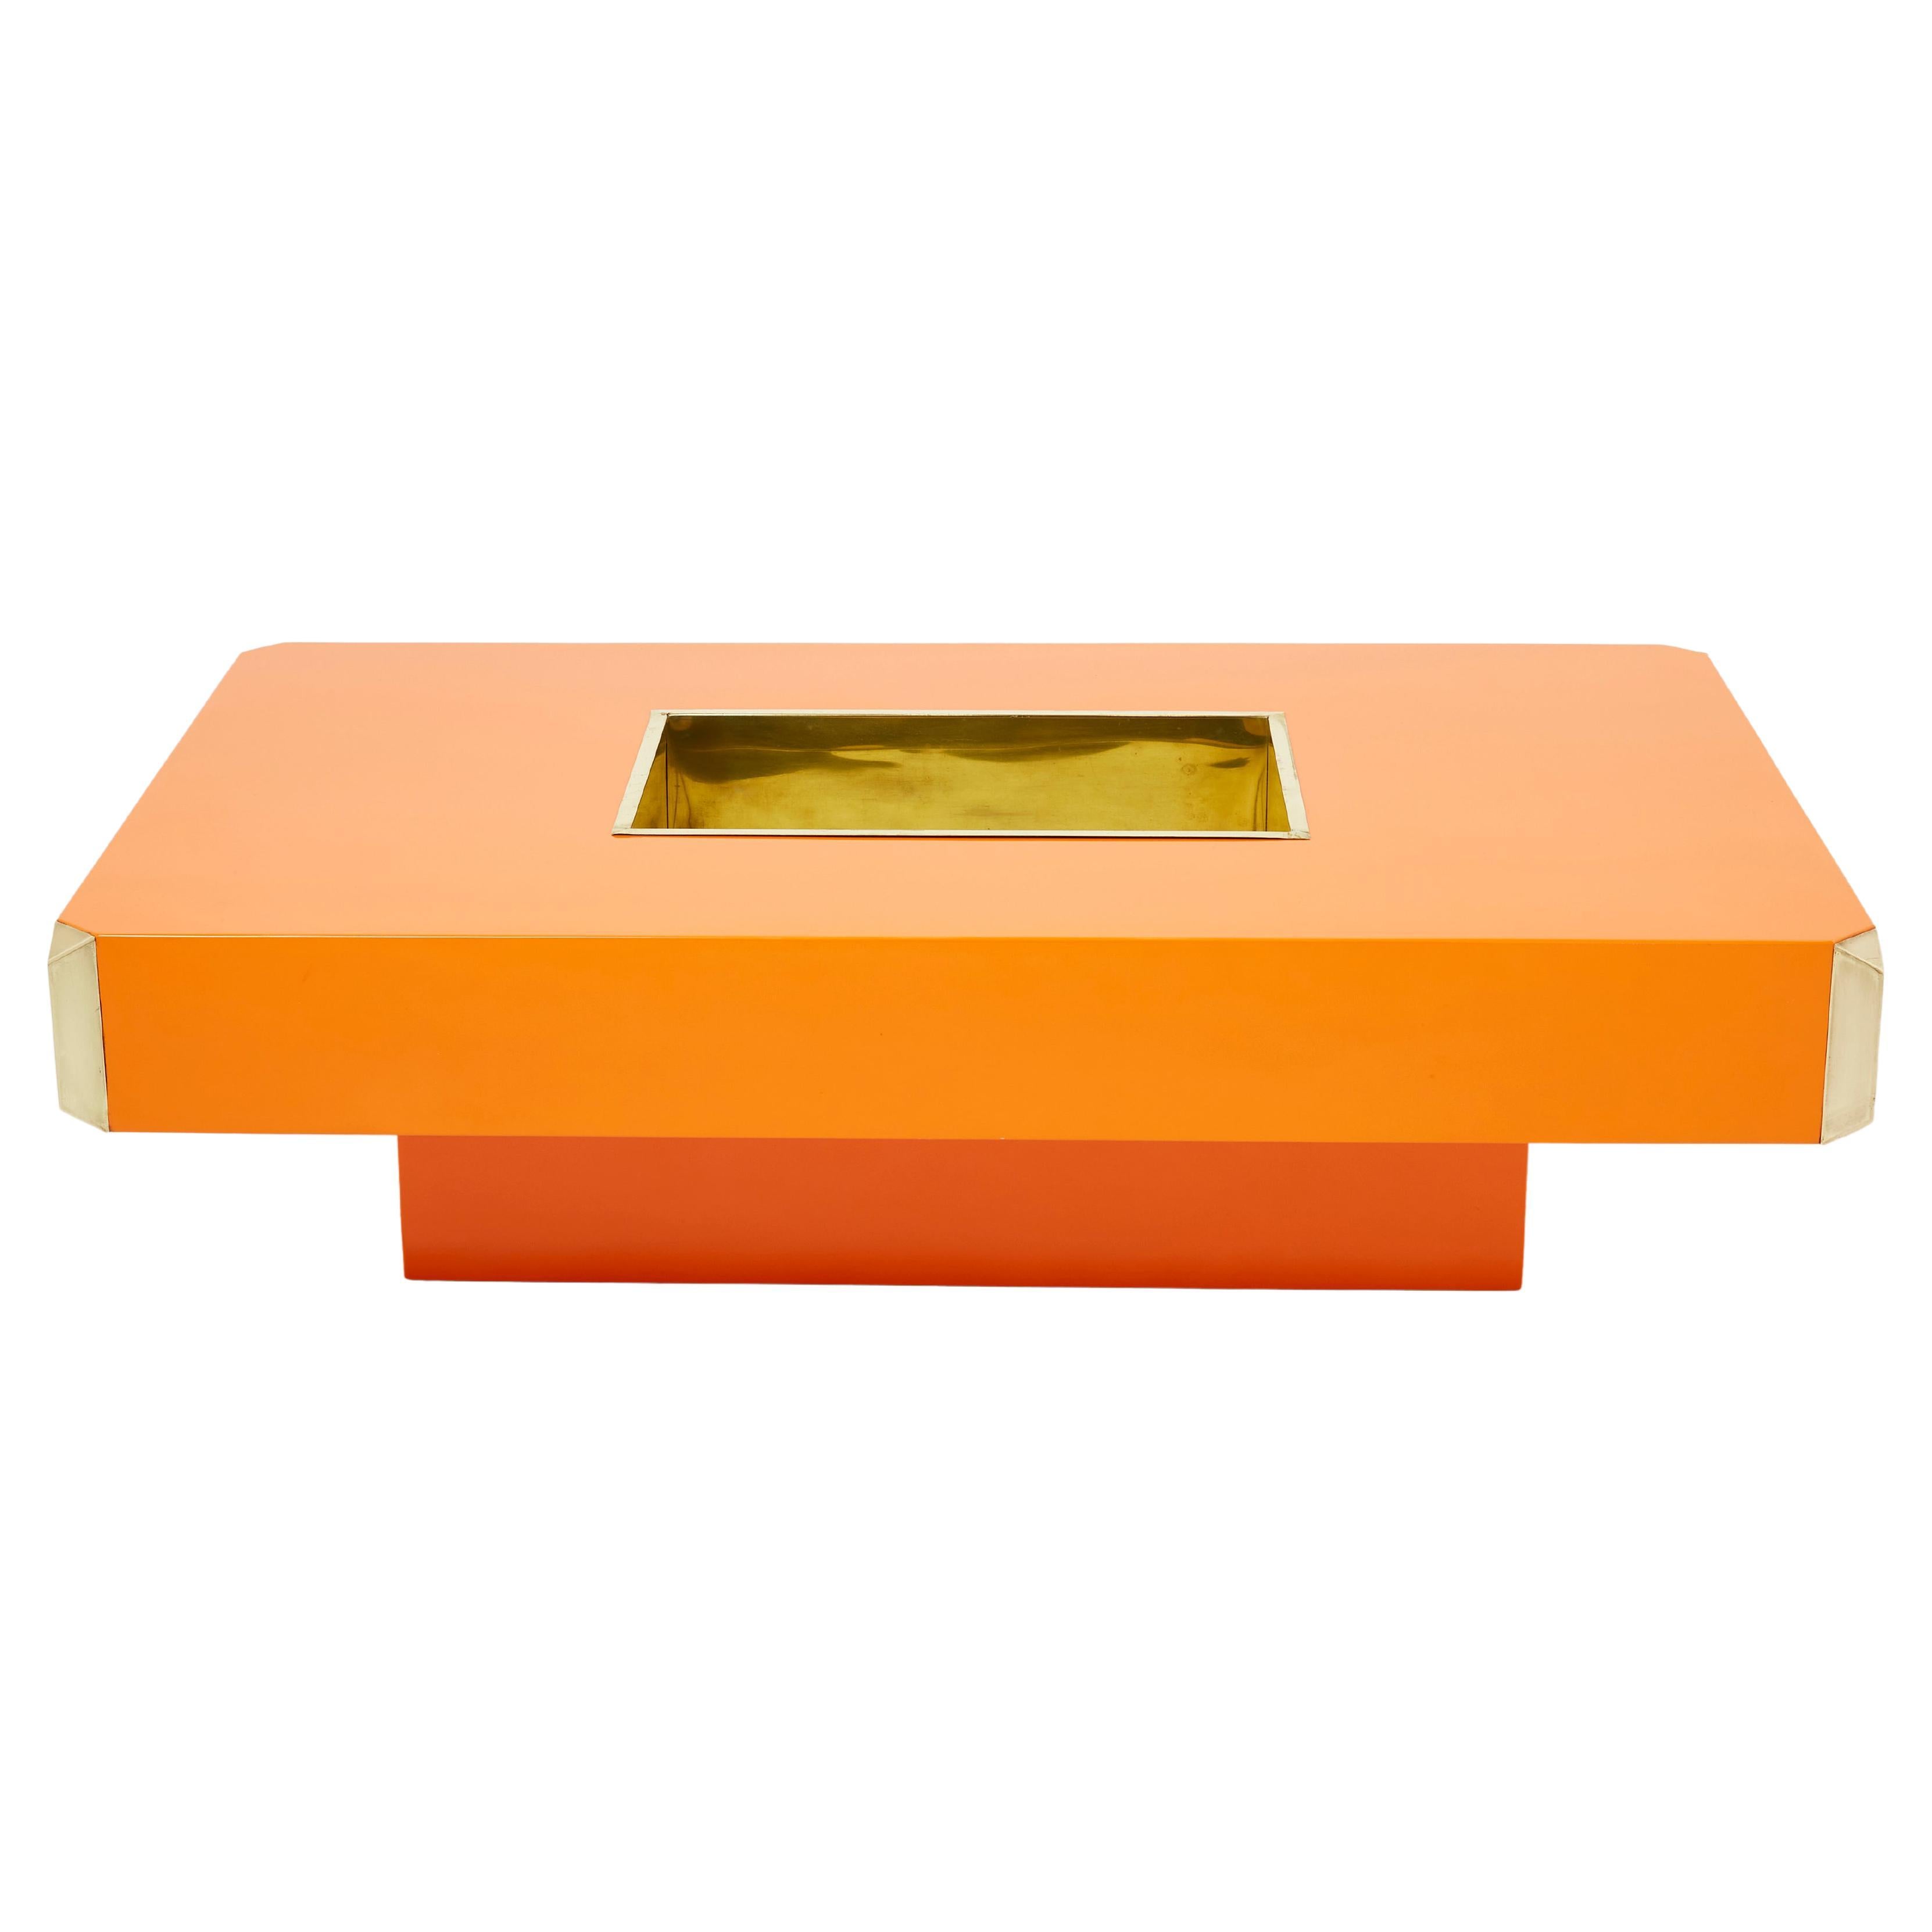 Willy Rizzo Orange Lacquer and Brass Bar Coffee Table Alveo, 1970s